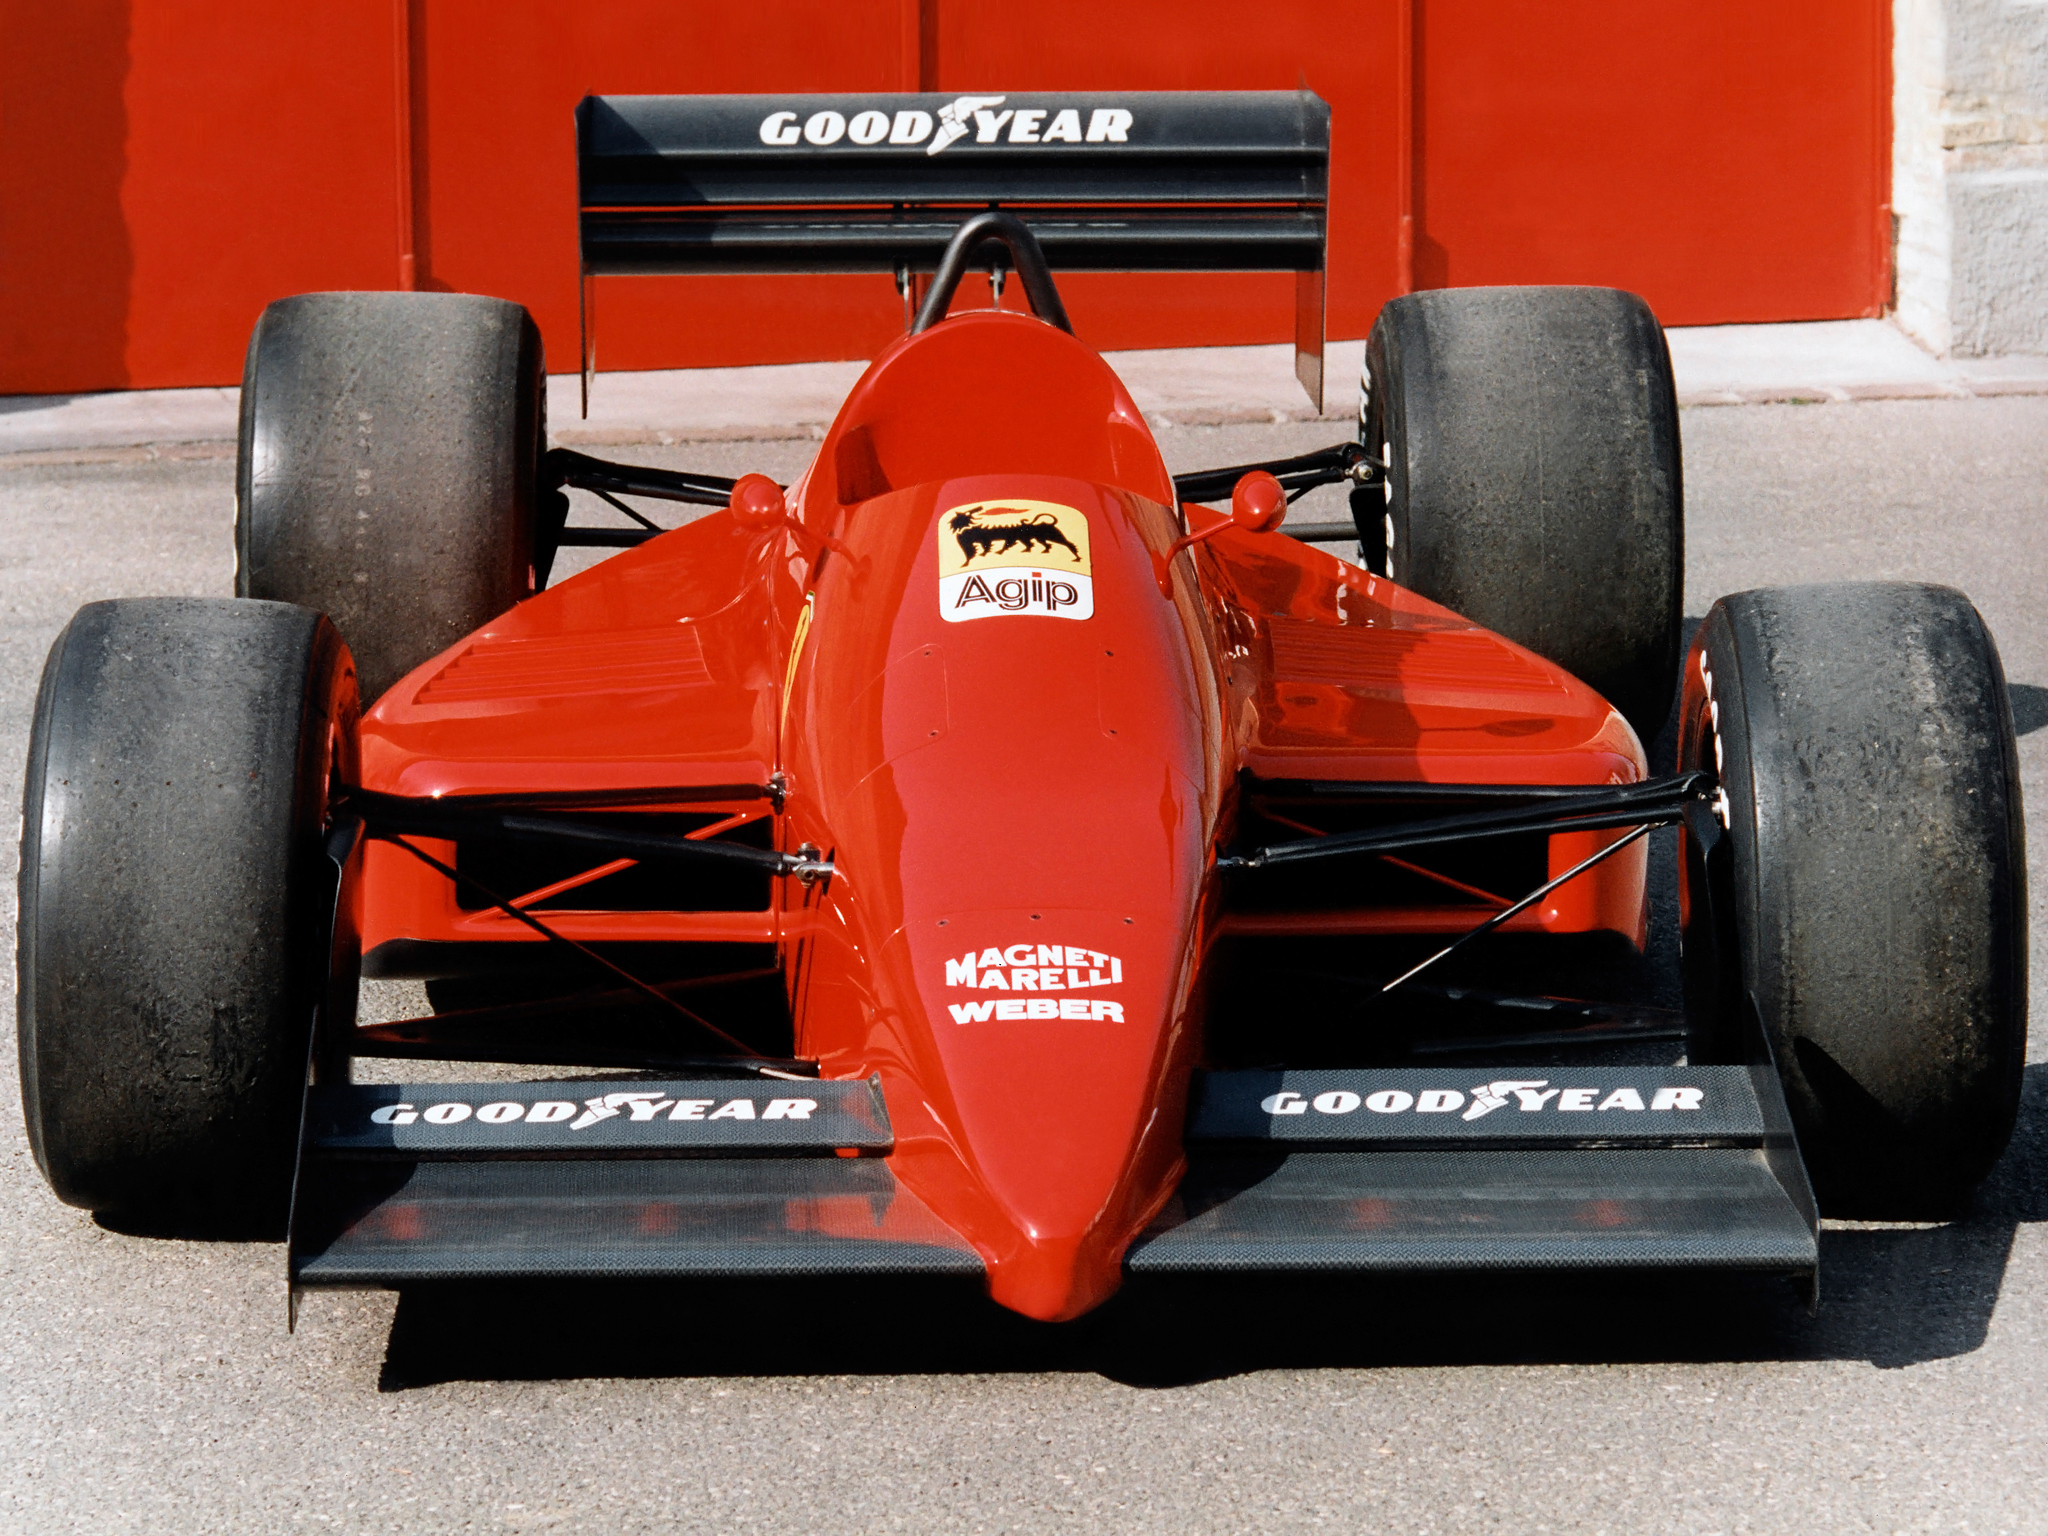 Beautiful and clean lines, the single-seater built for Indianapolis never demonstrated its abilities since it was never entered into a race